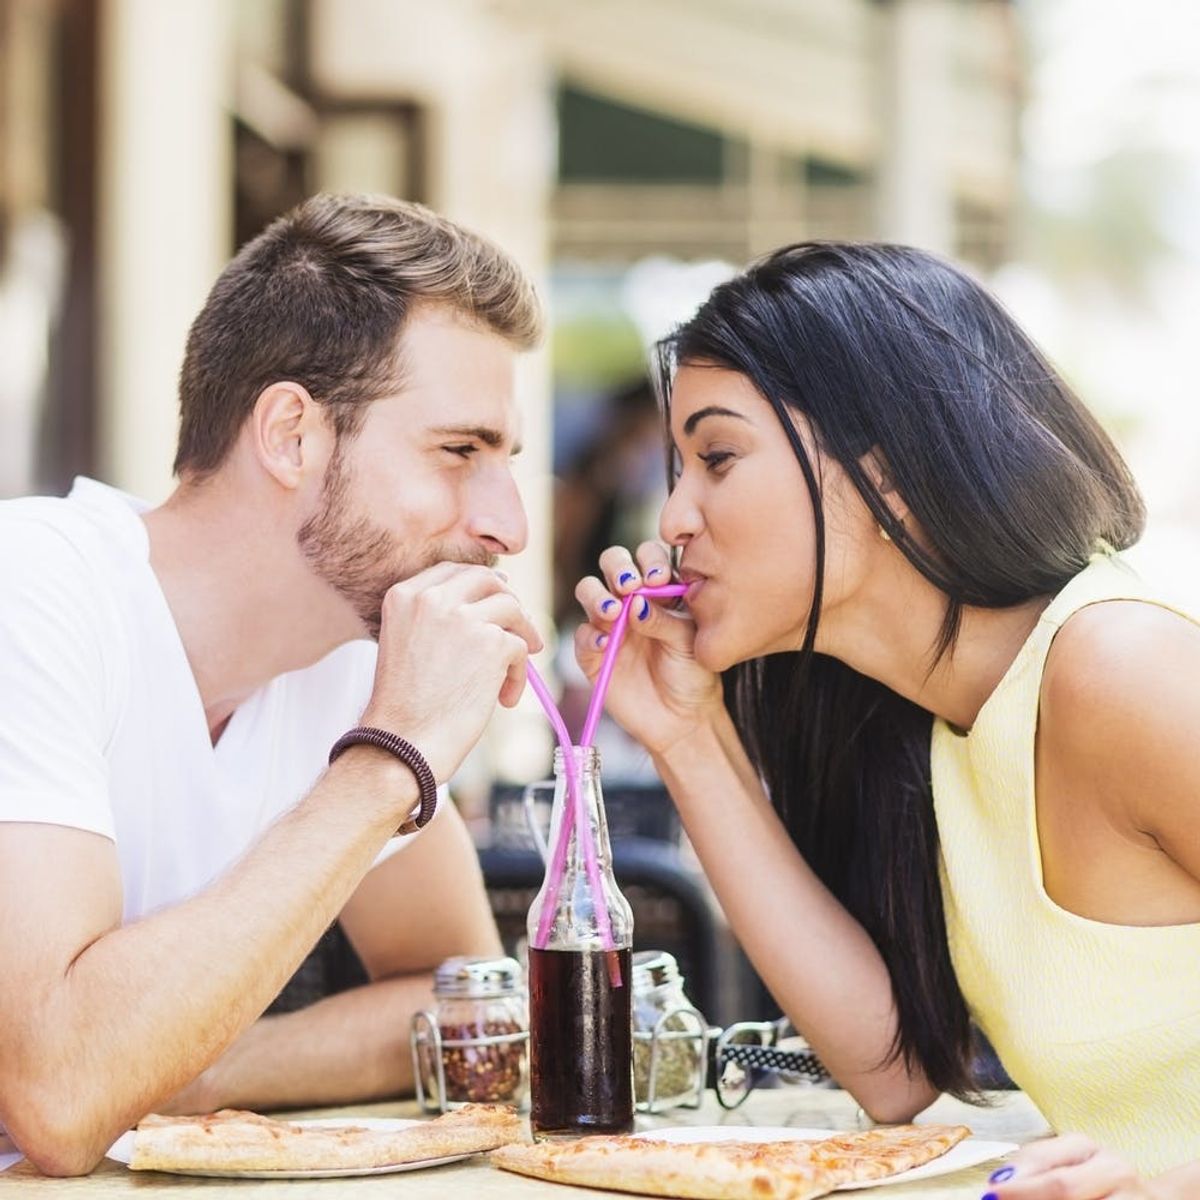 According to Single Men in the US, Feminism Has Changed Dating for the Better